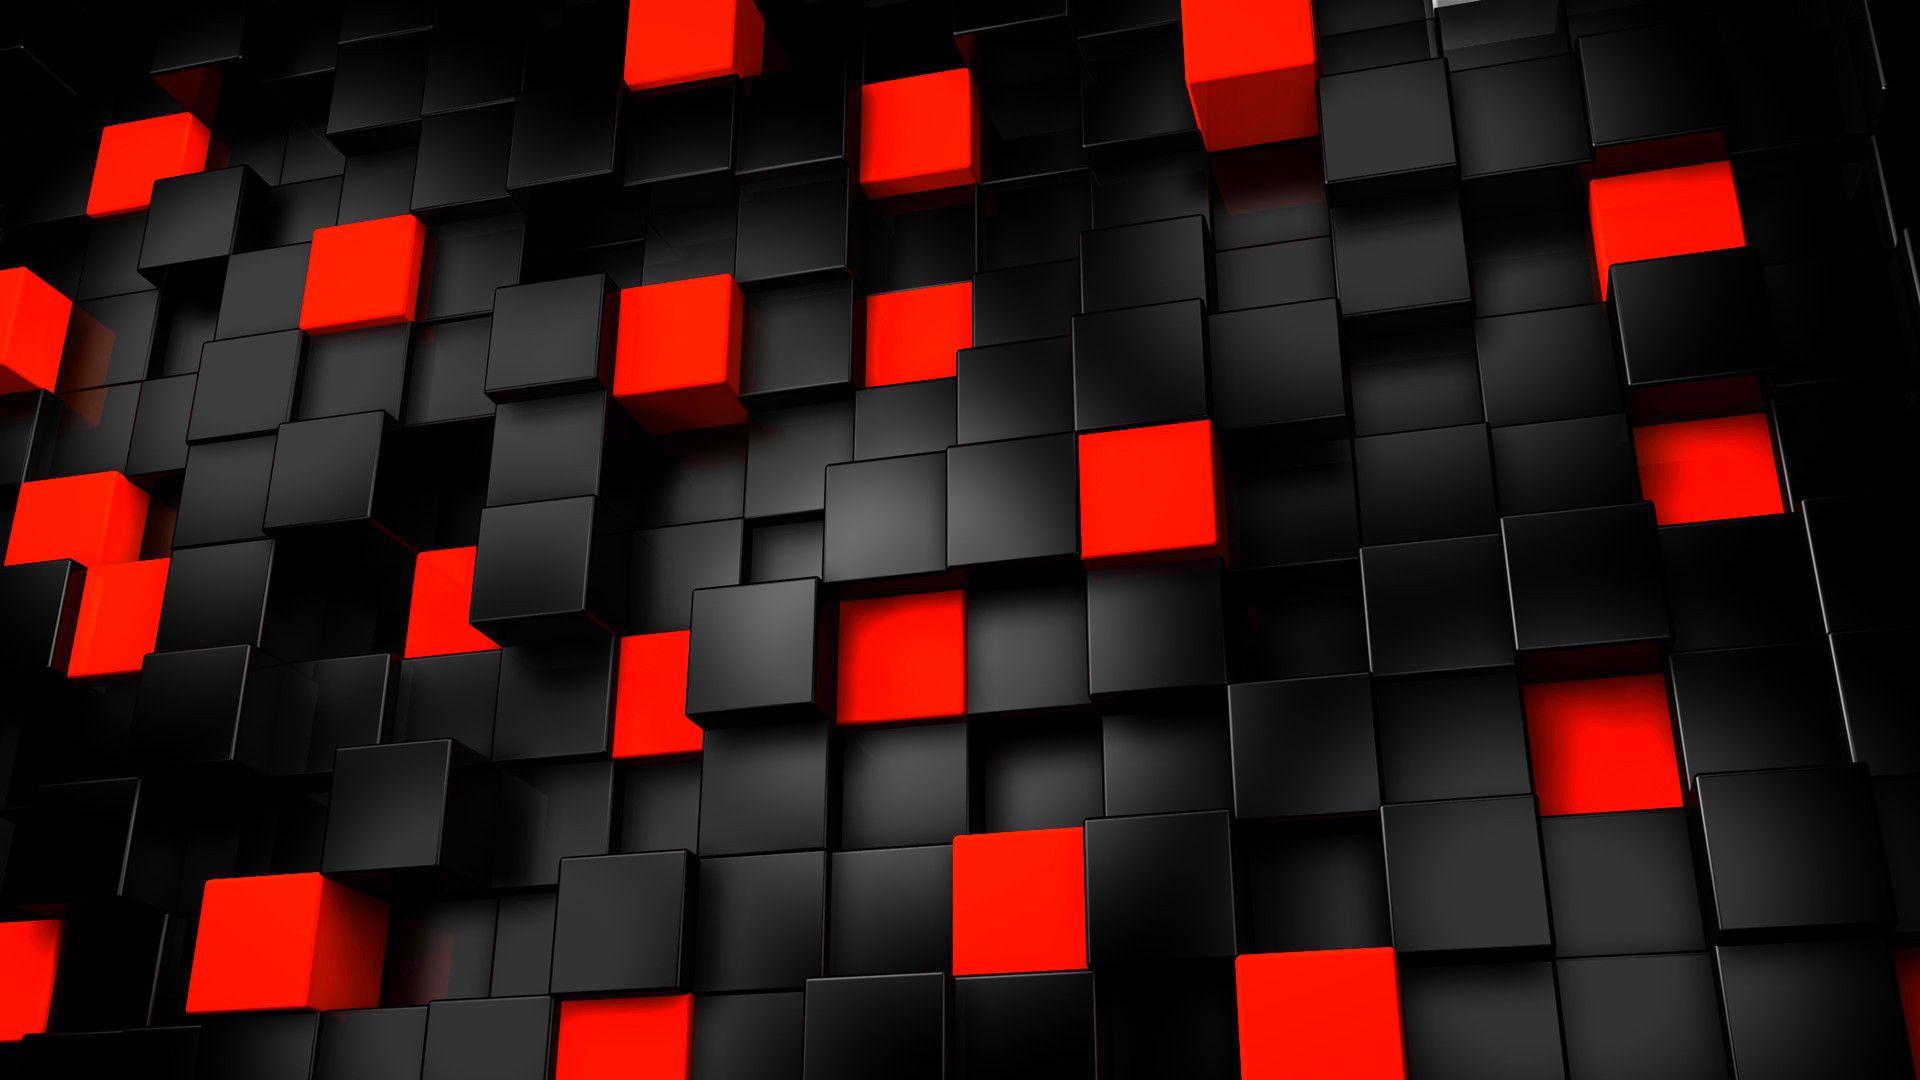 black and red wallpaper HD black and red abstract wallpaper HD